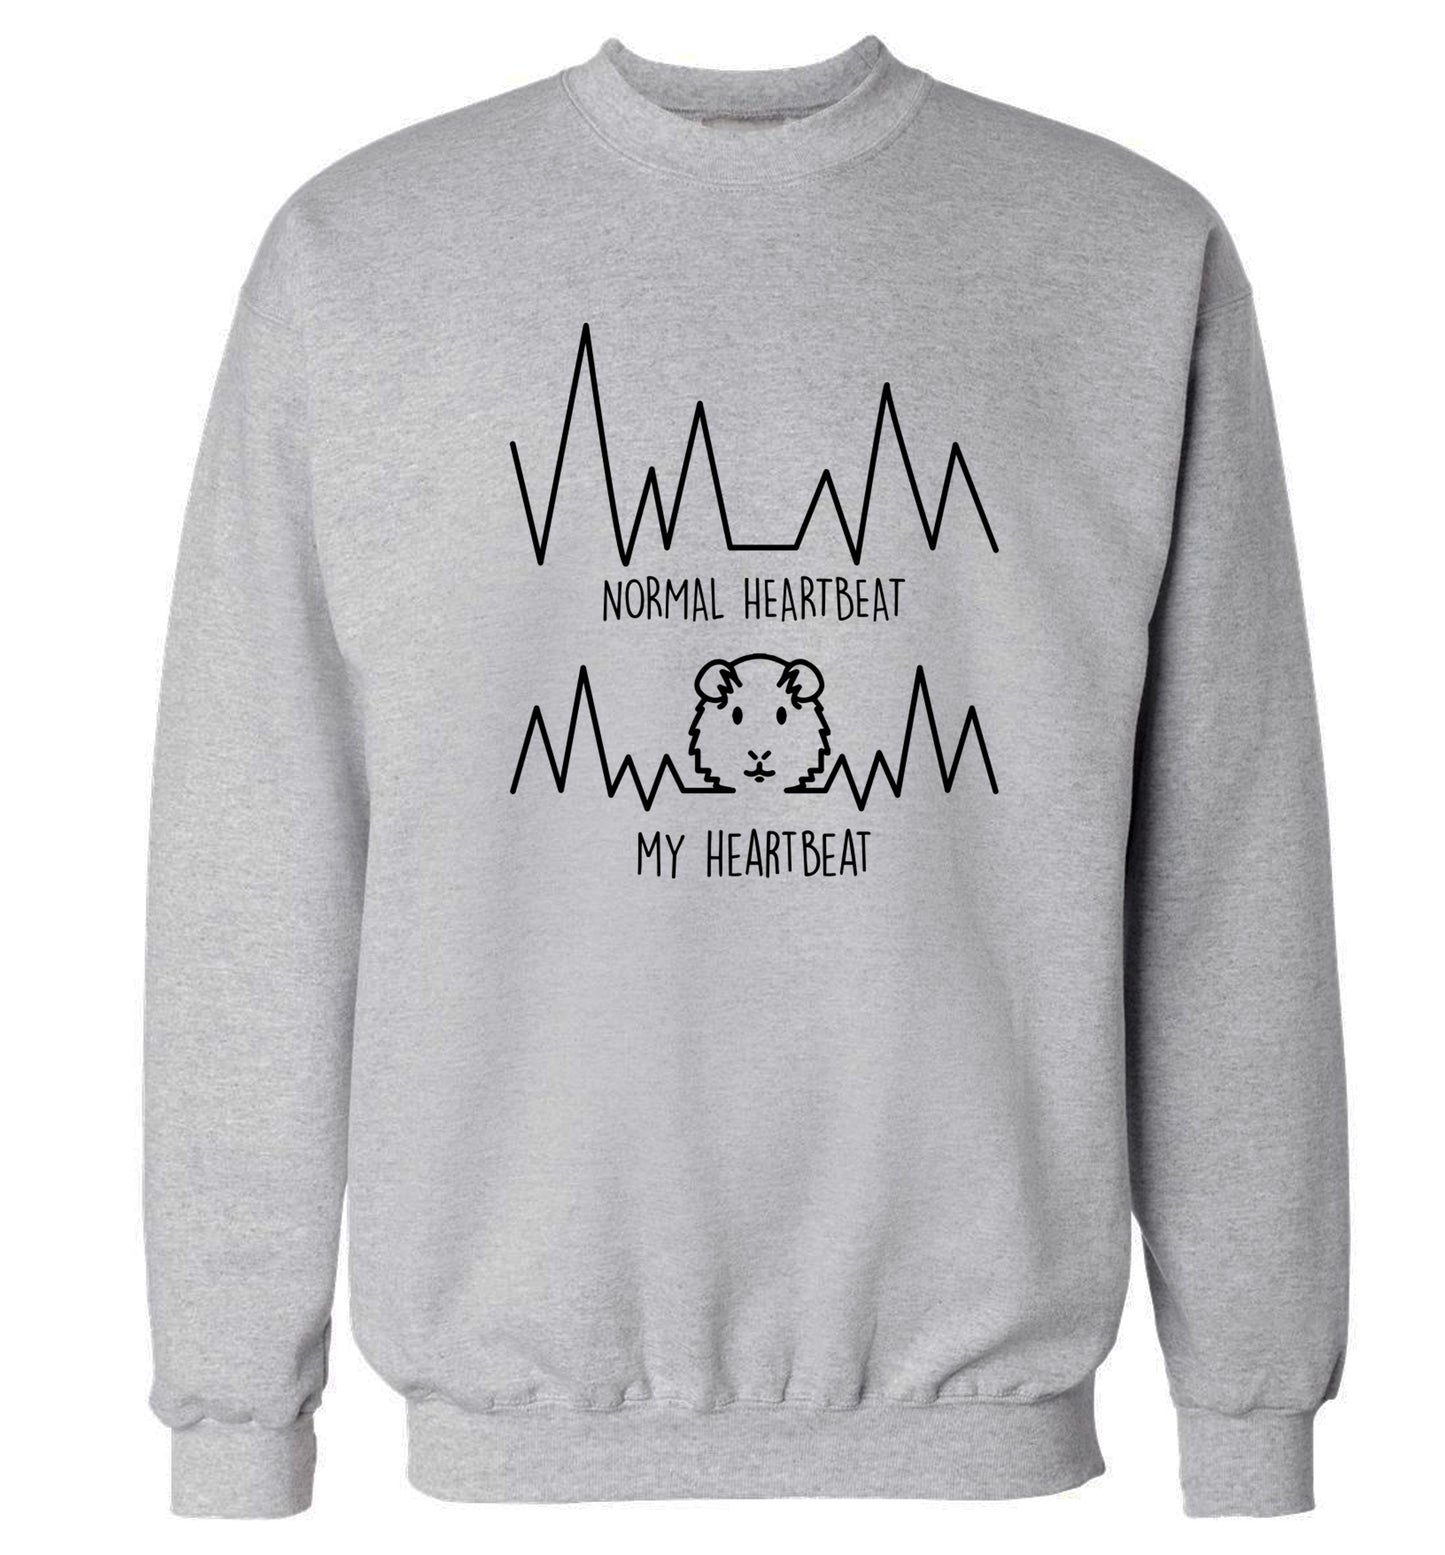 Normal heartbeat vs my heartbeat guinea pig lover Adult's unisex grey  sweater 2XL